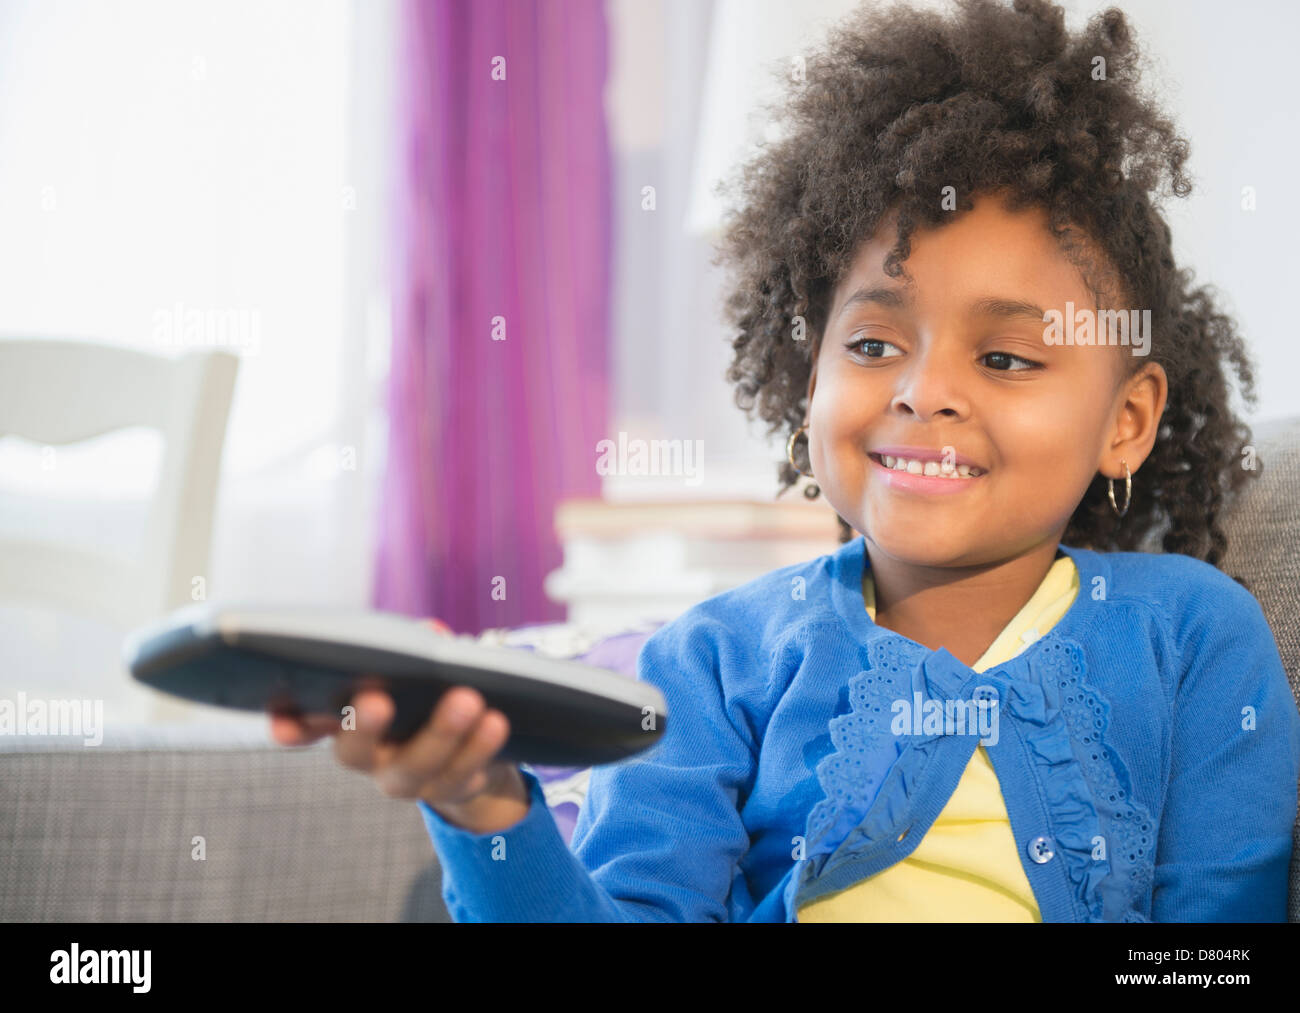 African American girl watching television on sofa Stock Photo